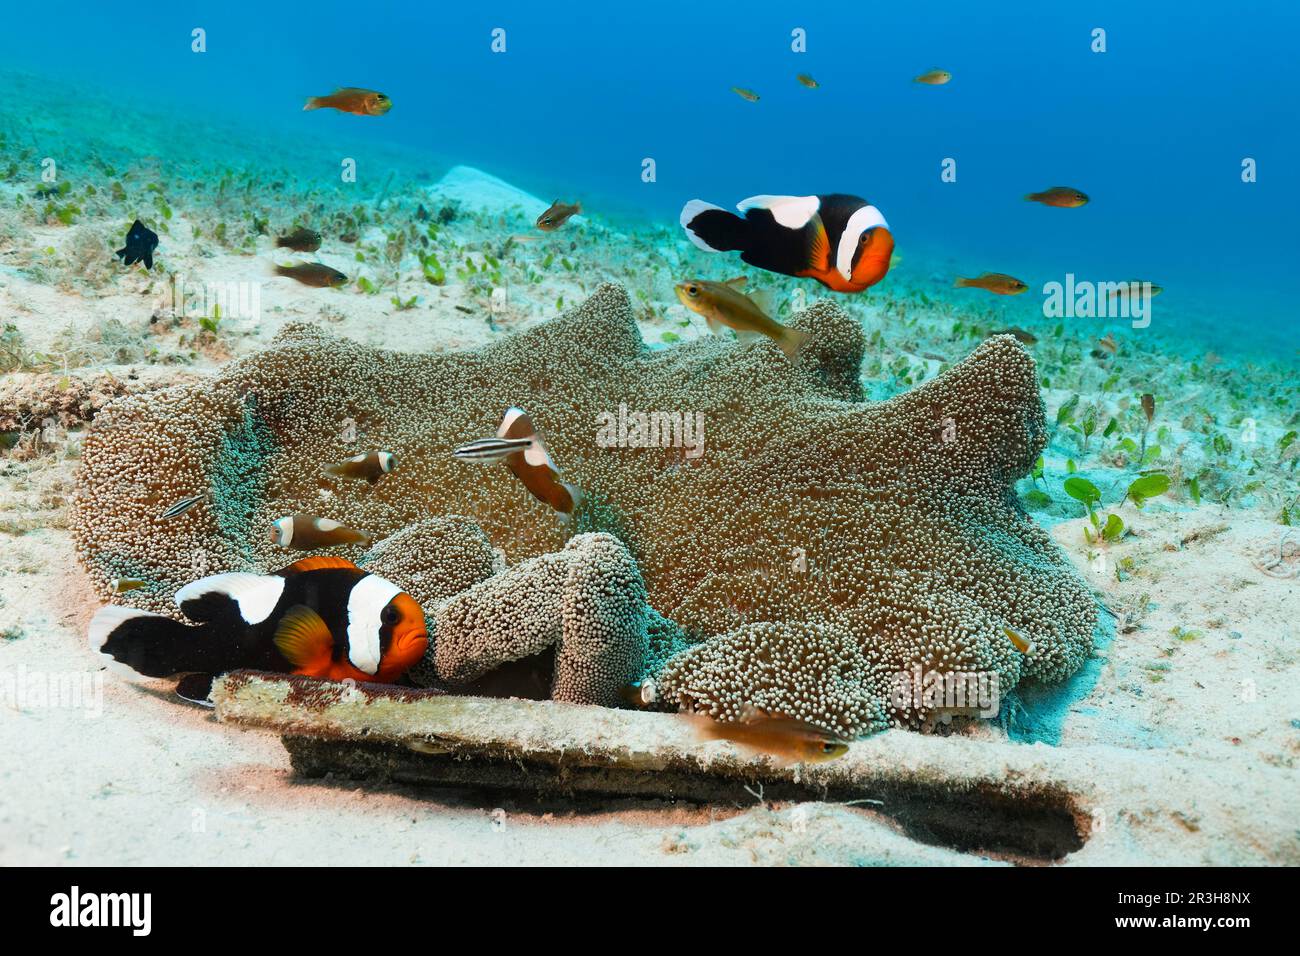 Saddleback clownfish (Amphiprion polymnus) and juveniles, clutch and mertens' carpet sea anemone (Stichodactyla mertensii), seagrass meadow, Sulu Stock Photo